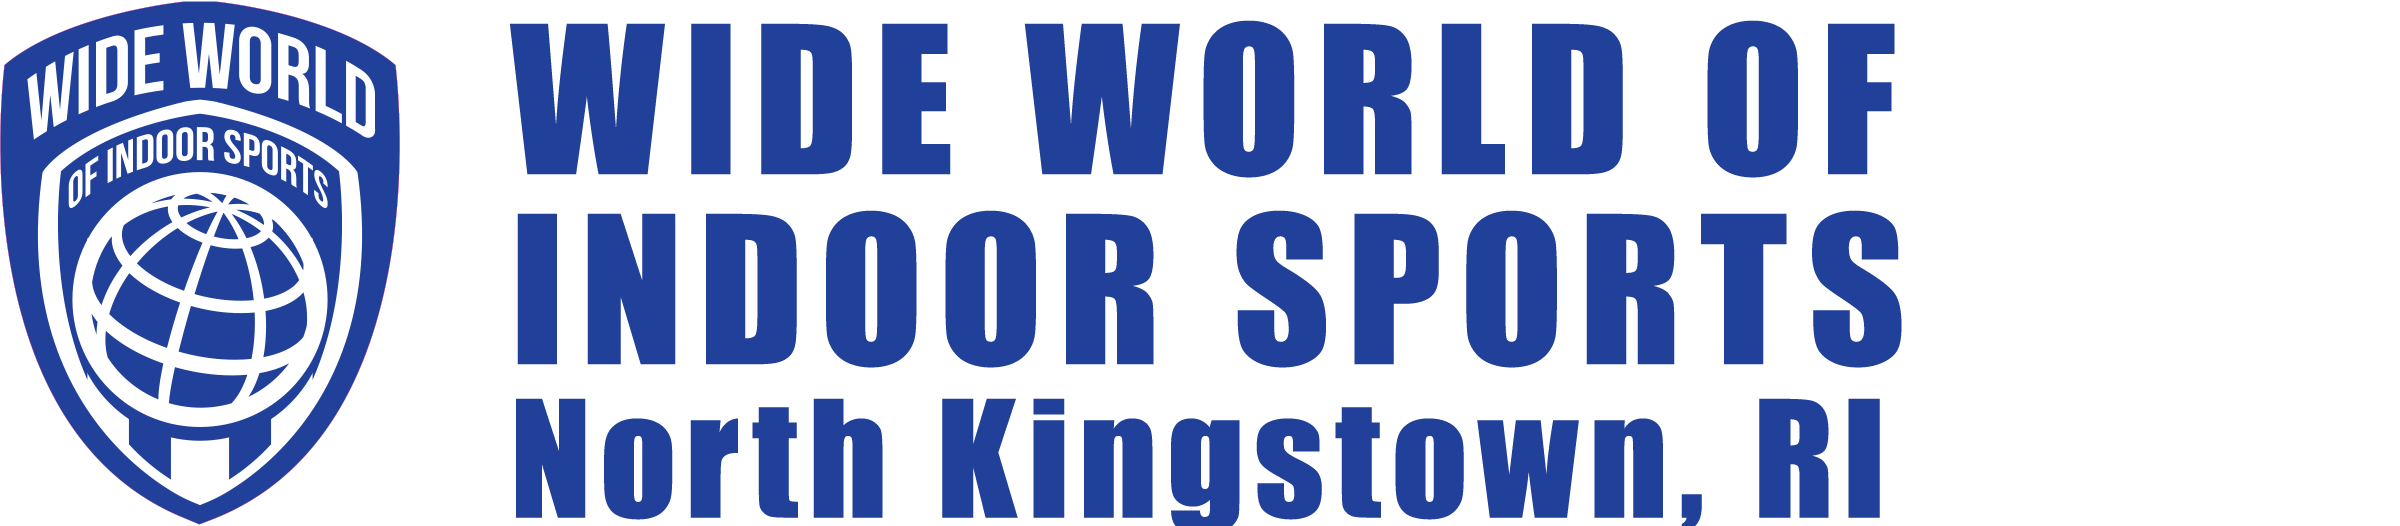 Wide World of Indoor Sports – North Kingstown